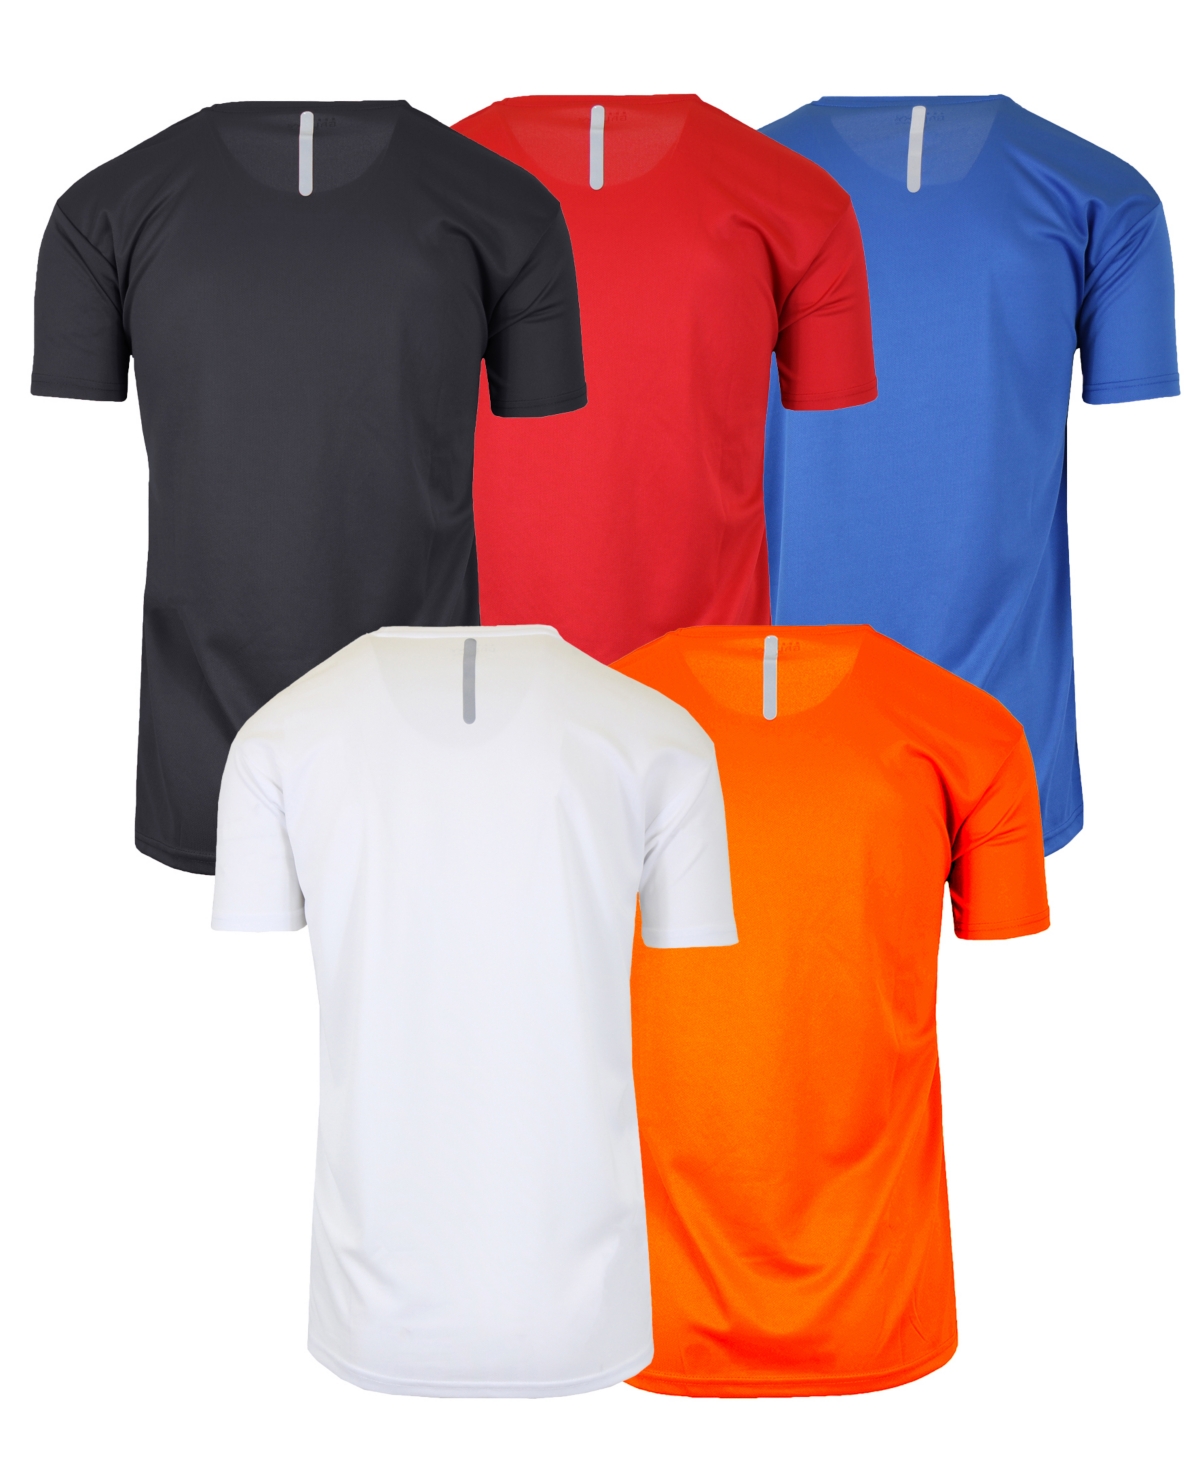 Shop Galaxy By Harvic Men's Short Sleeve Moisture-wicking Quick Dry Performance Crew Neck Tee -5 Pack In Red Multi